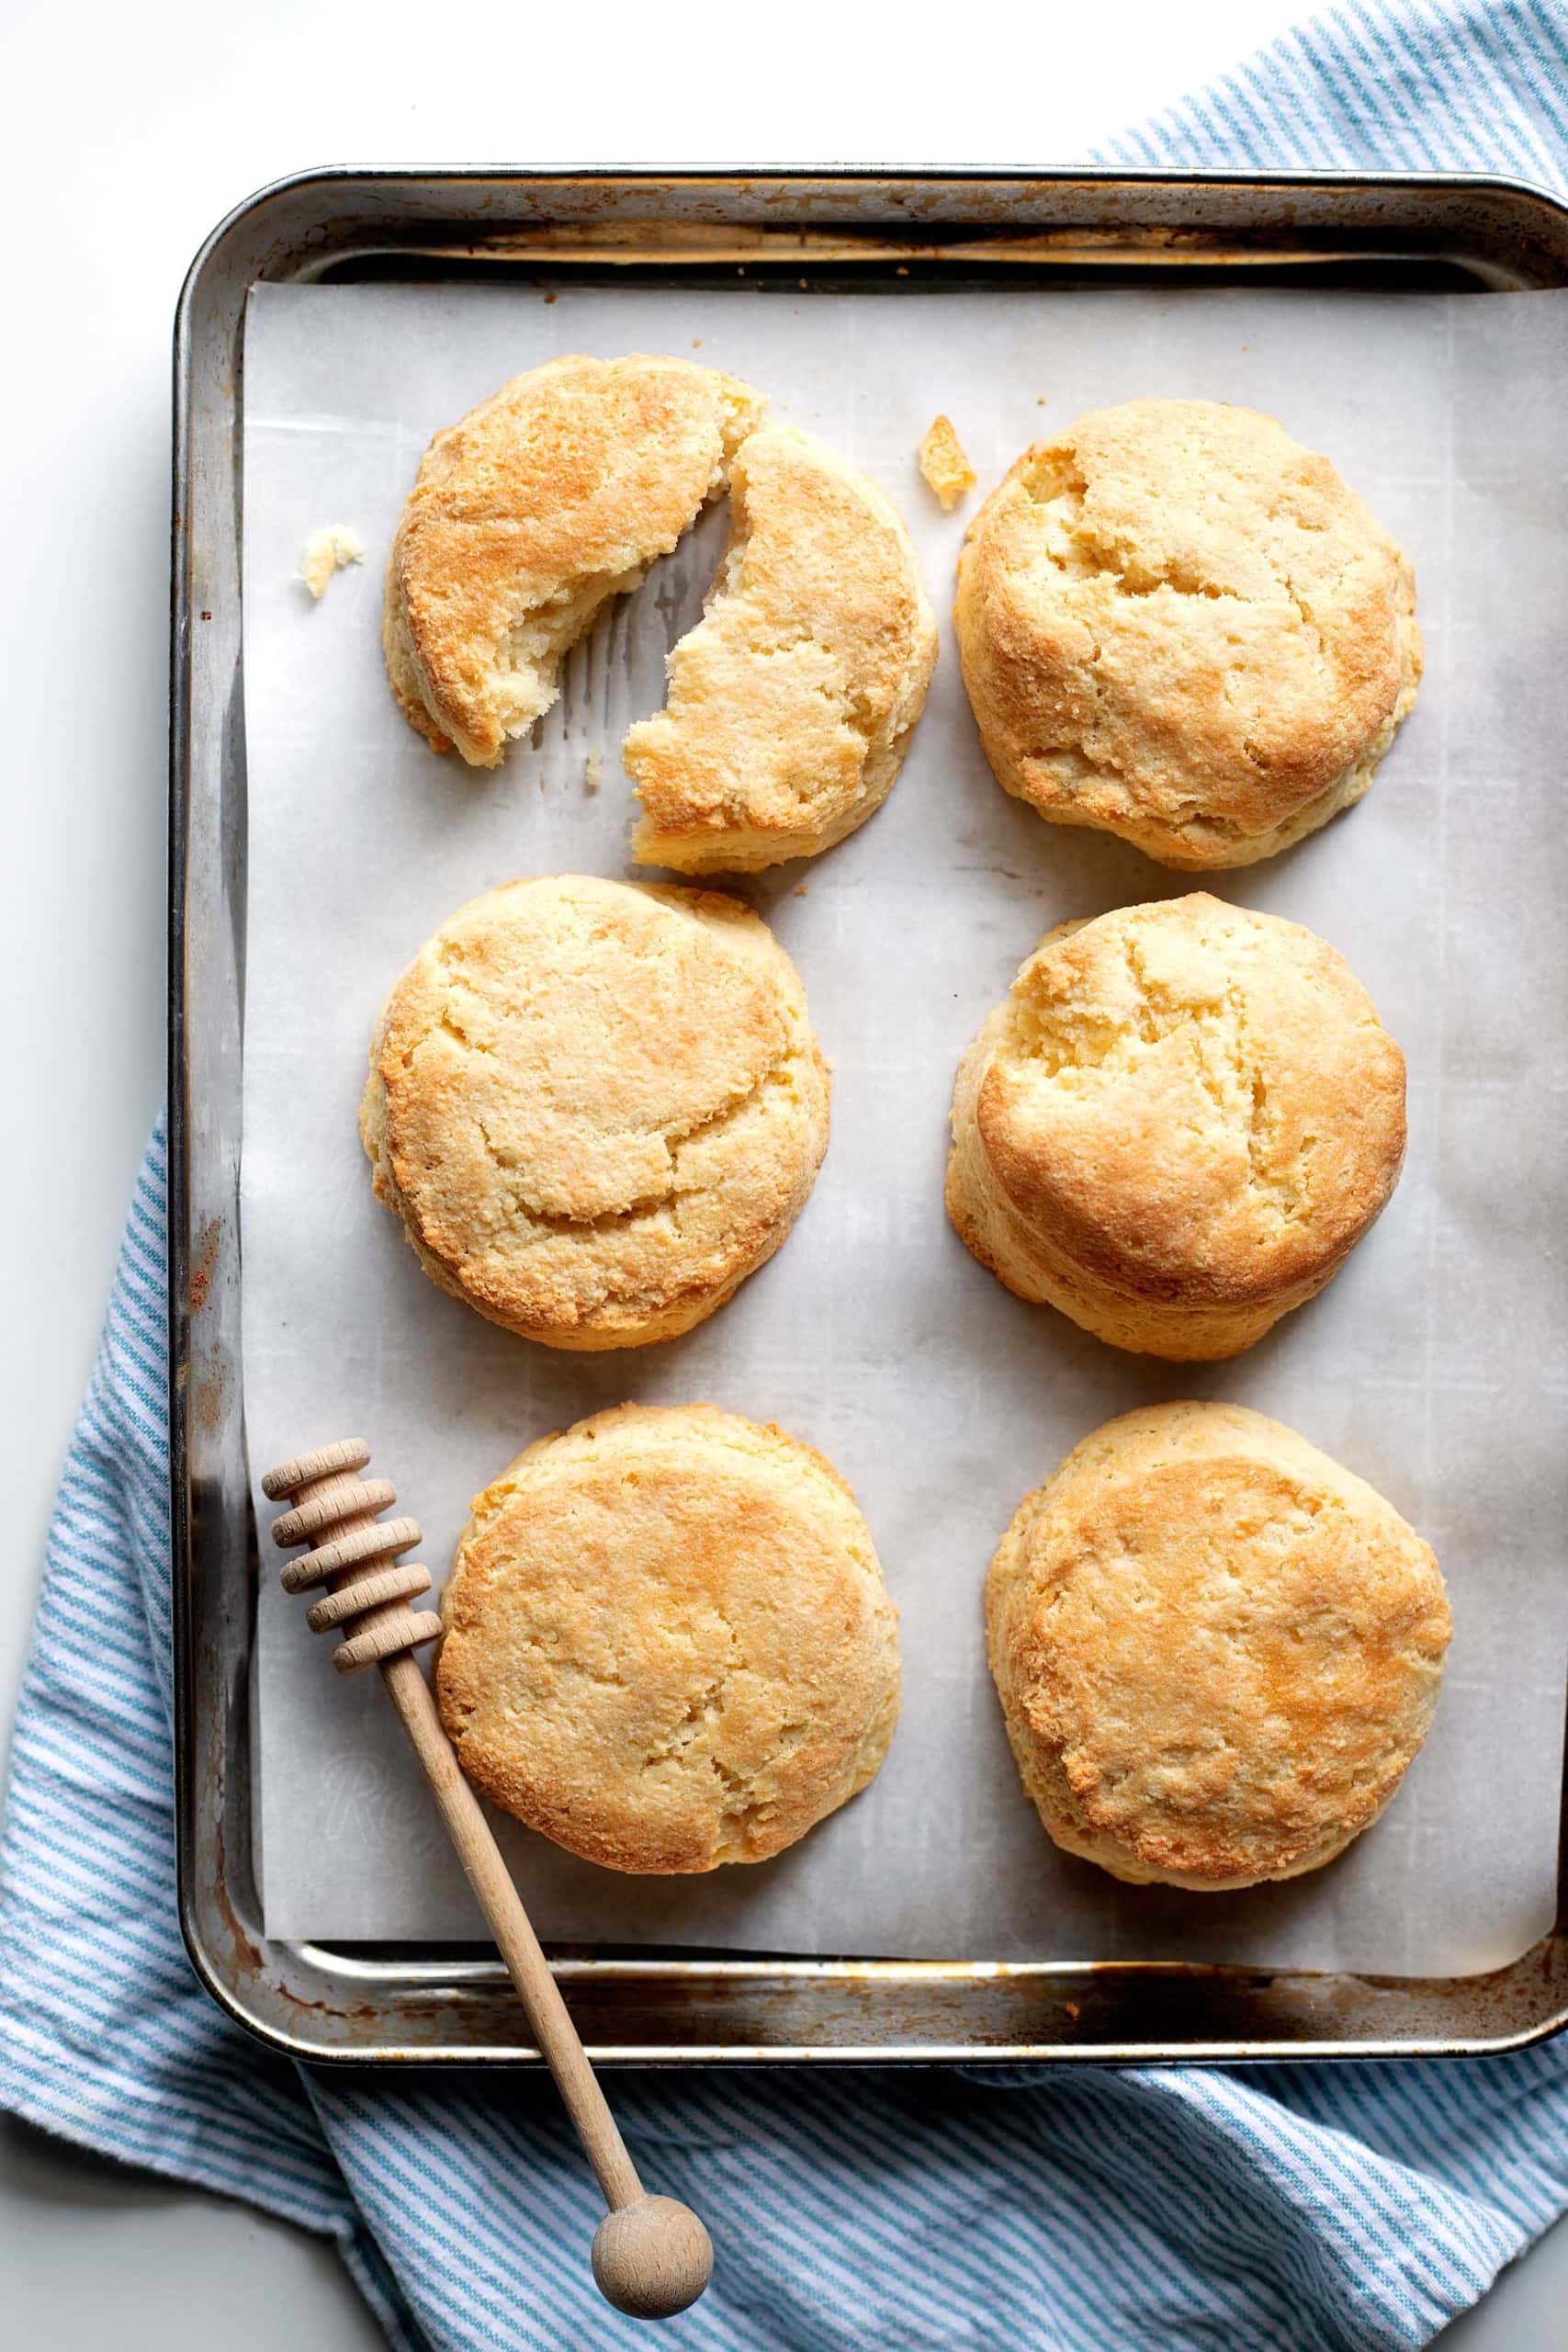 Only 25 minutes to make these easy keto biscuits! These buttermilk biscuits are super low carb, so light and fluffy, and ridiculously easy to make! This keto side dish goes perfectly with any meal, especially barbeque and steaks. They are also gluten free biscuits! #healthydinner #healthybaking #ketobiscuits #healthysidedish #ketodinner #lowcarbdinner #buttermilkbiscuits #ketorecipe #healthyeating #mealprep #mealprepideas #lowcarb #glutenfreedinner #ketolunch #glutenfreebiscuits #glutenfreebaking